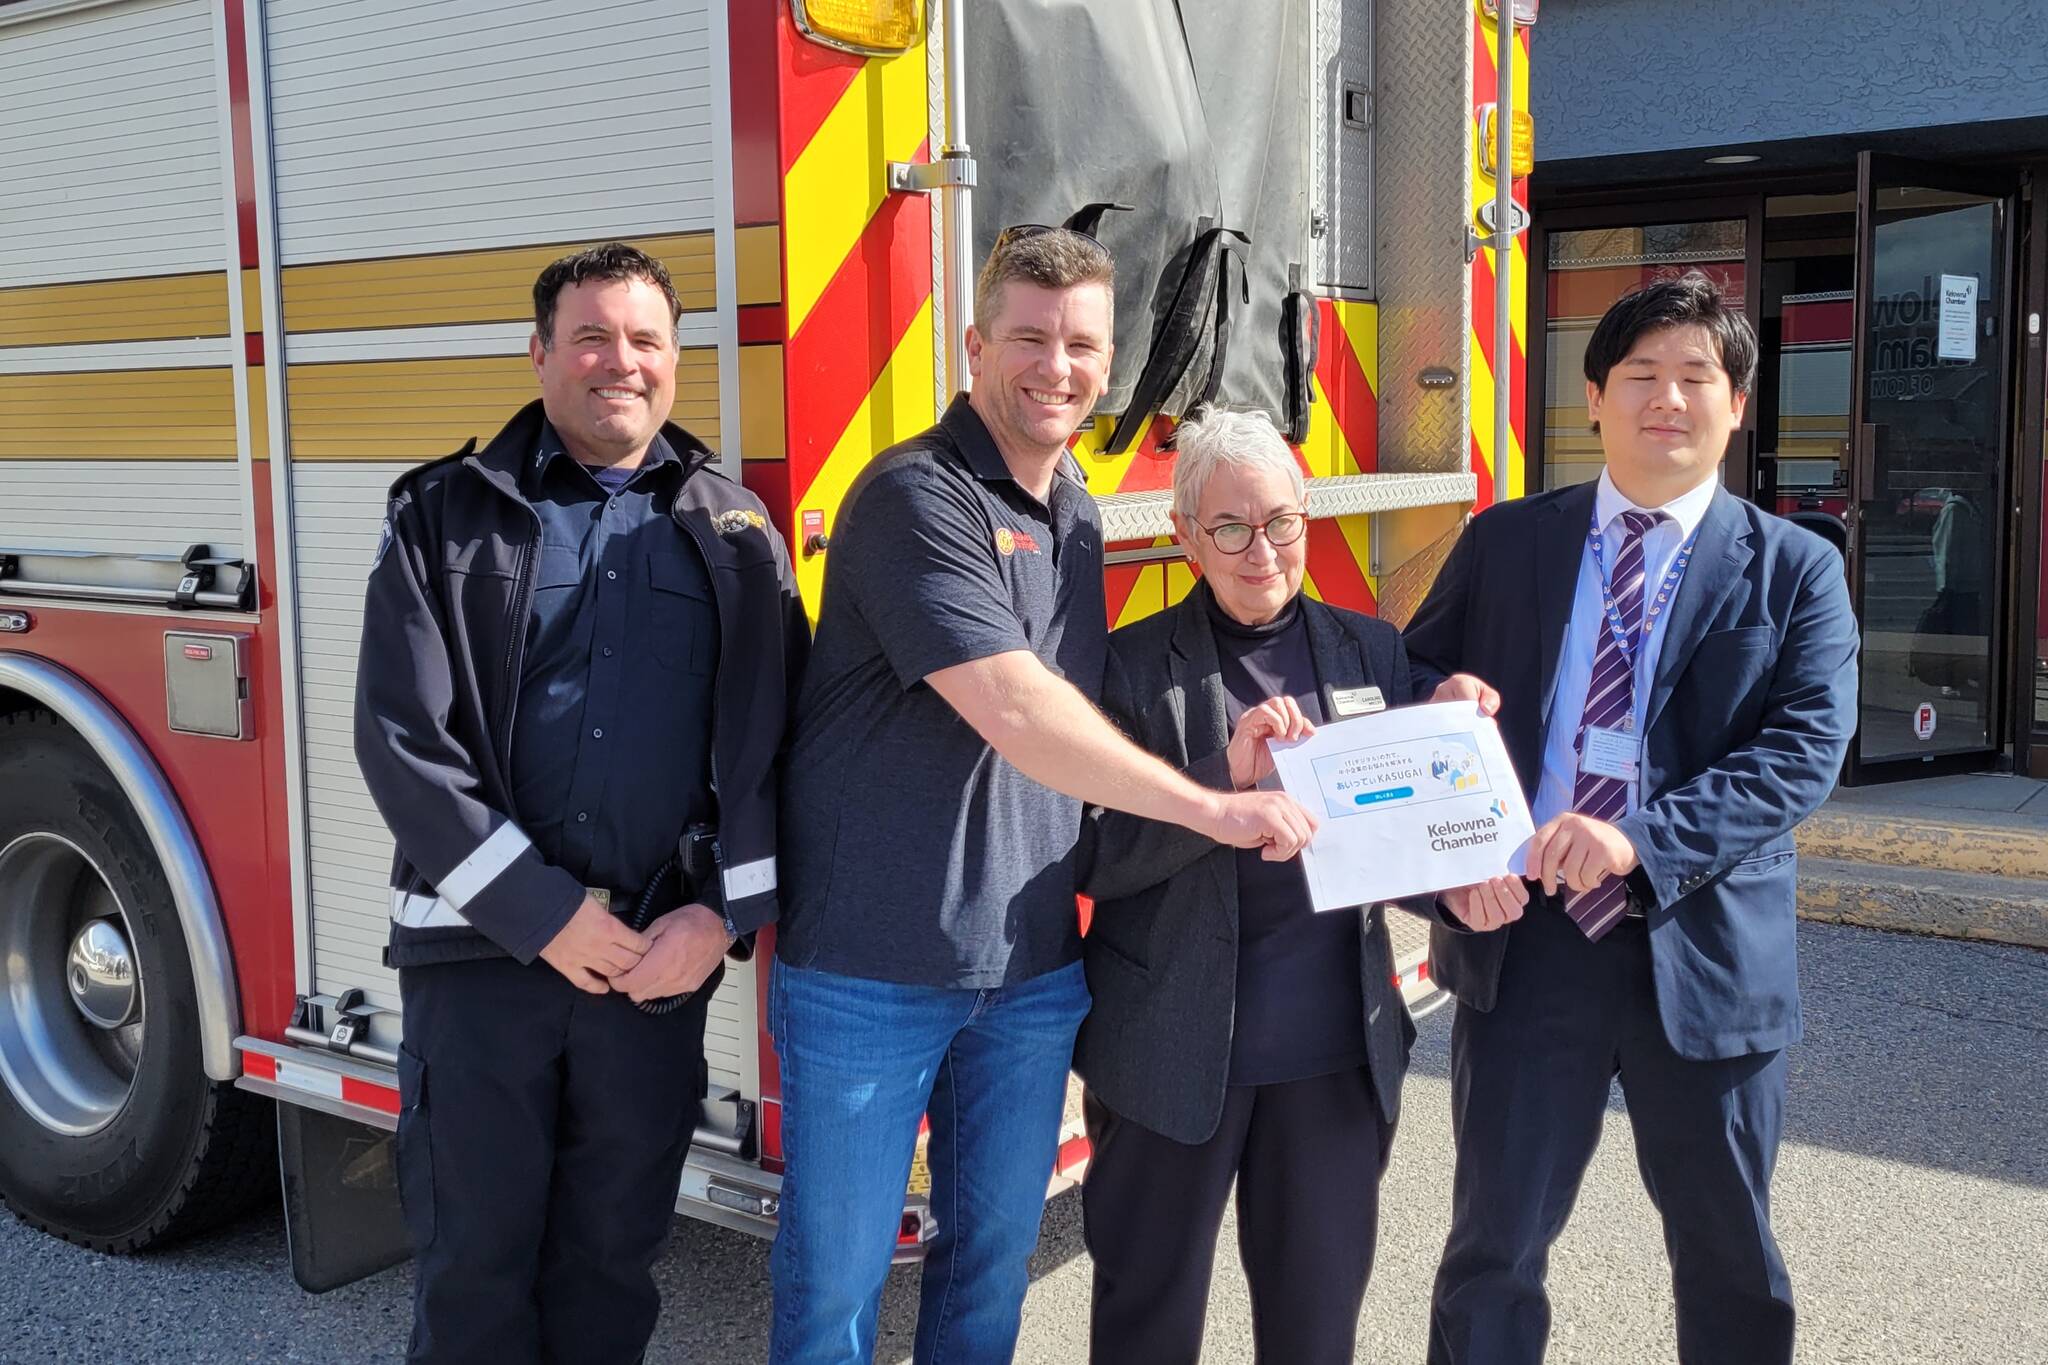 Kelowna’s Japan sister city, Kasugai, has made a $1,000 donation wildfire relief efforts. (L-R: Stacey Young, Captain, Kelowna Fire Department Kyle Jacobsen, Vice President, Kelowna Professional Firefighters Caroline Miller, Policy & Government Relations Advisor, Kelowna Chamber Naruki Nishimuri, representing the Kasugai Chamber of Commerce. (Kelowna Chamber photo)